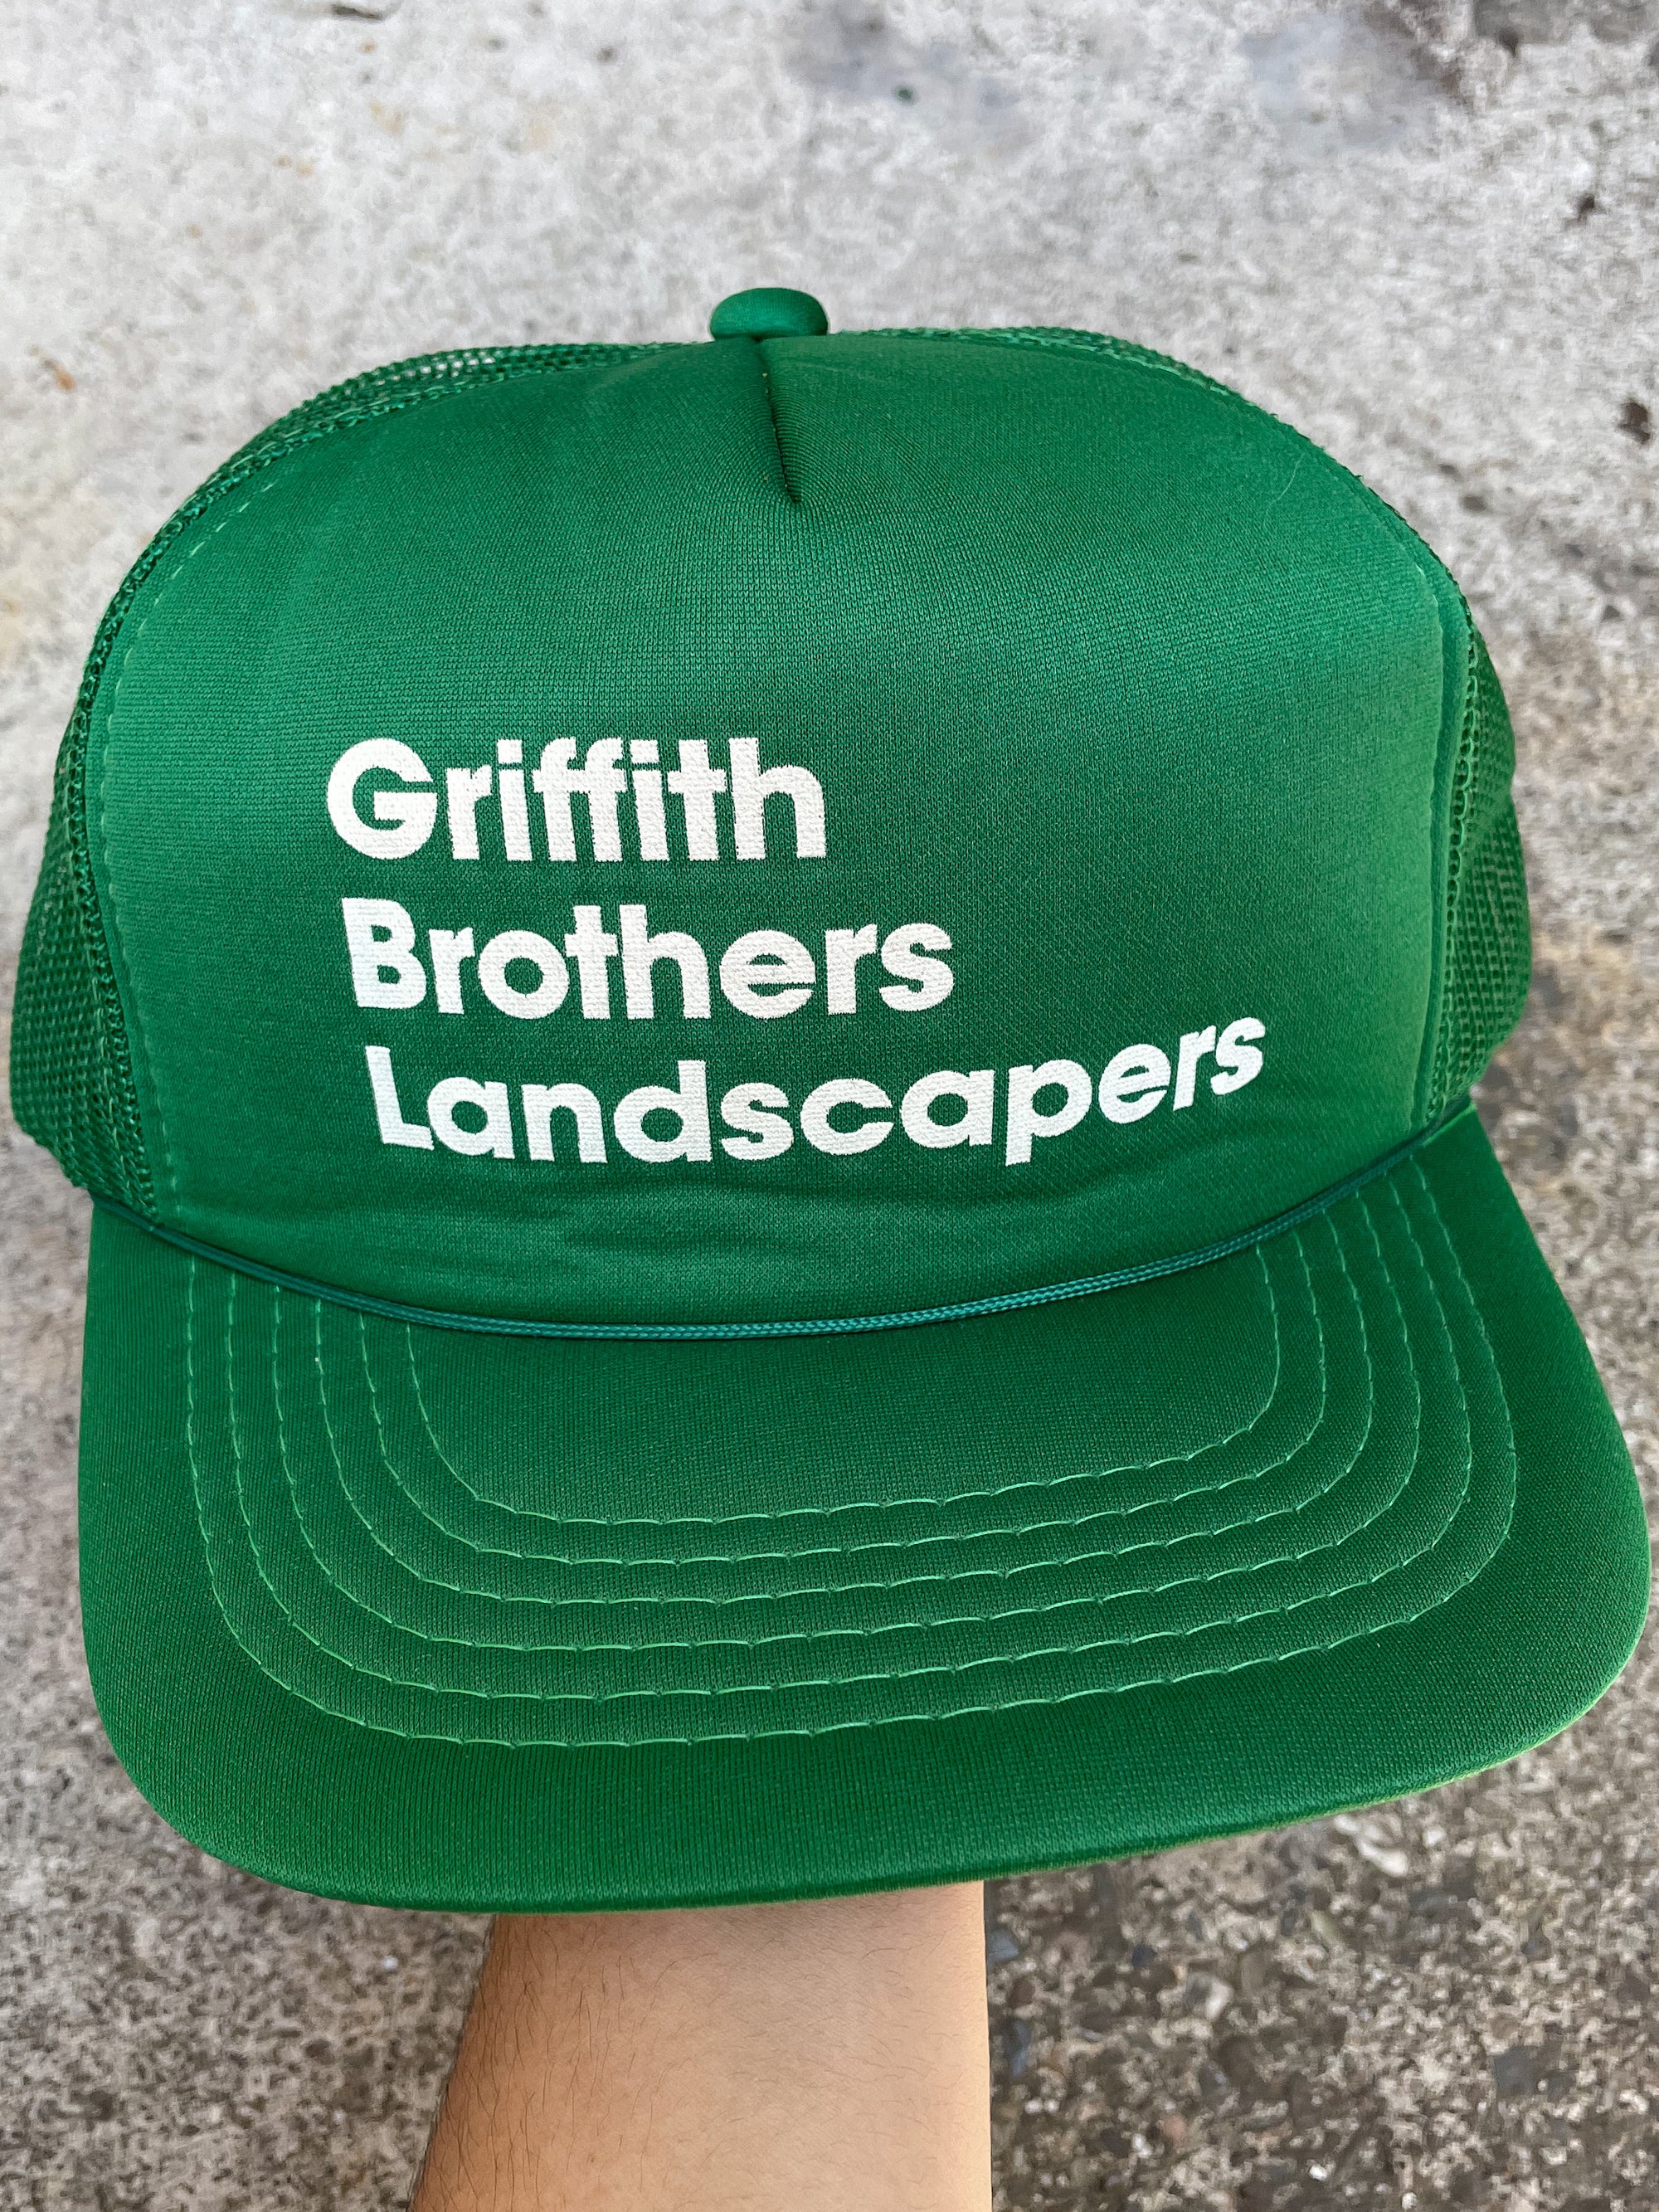 1990s “Griffith Brothers Landscapers” Trucker Hat